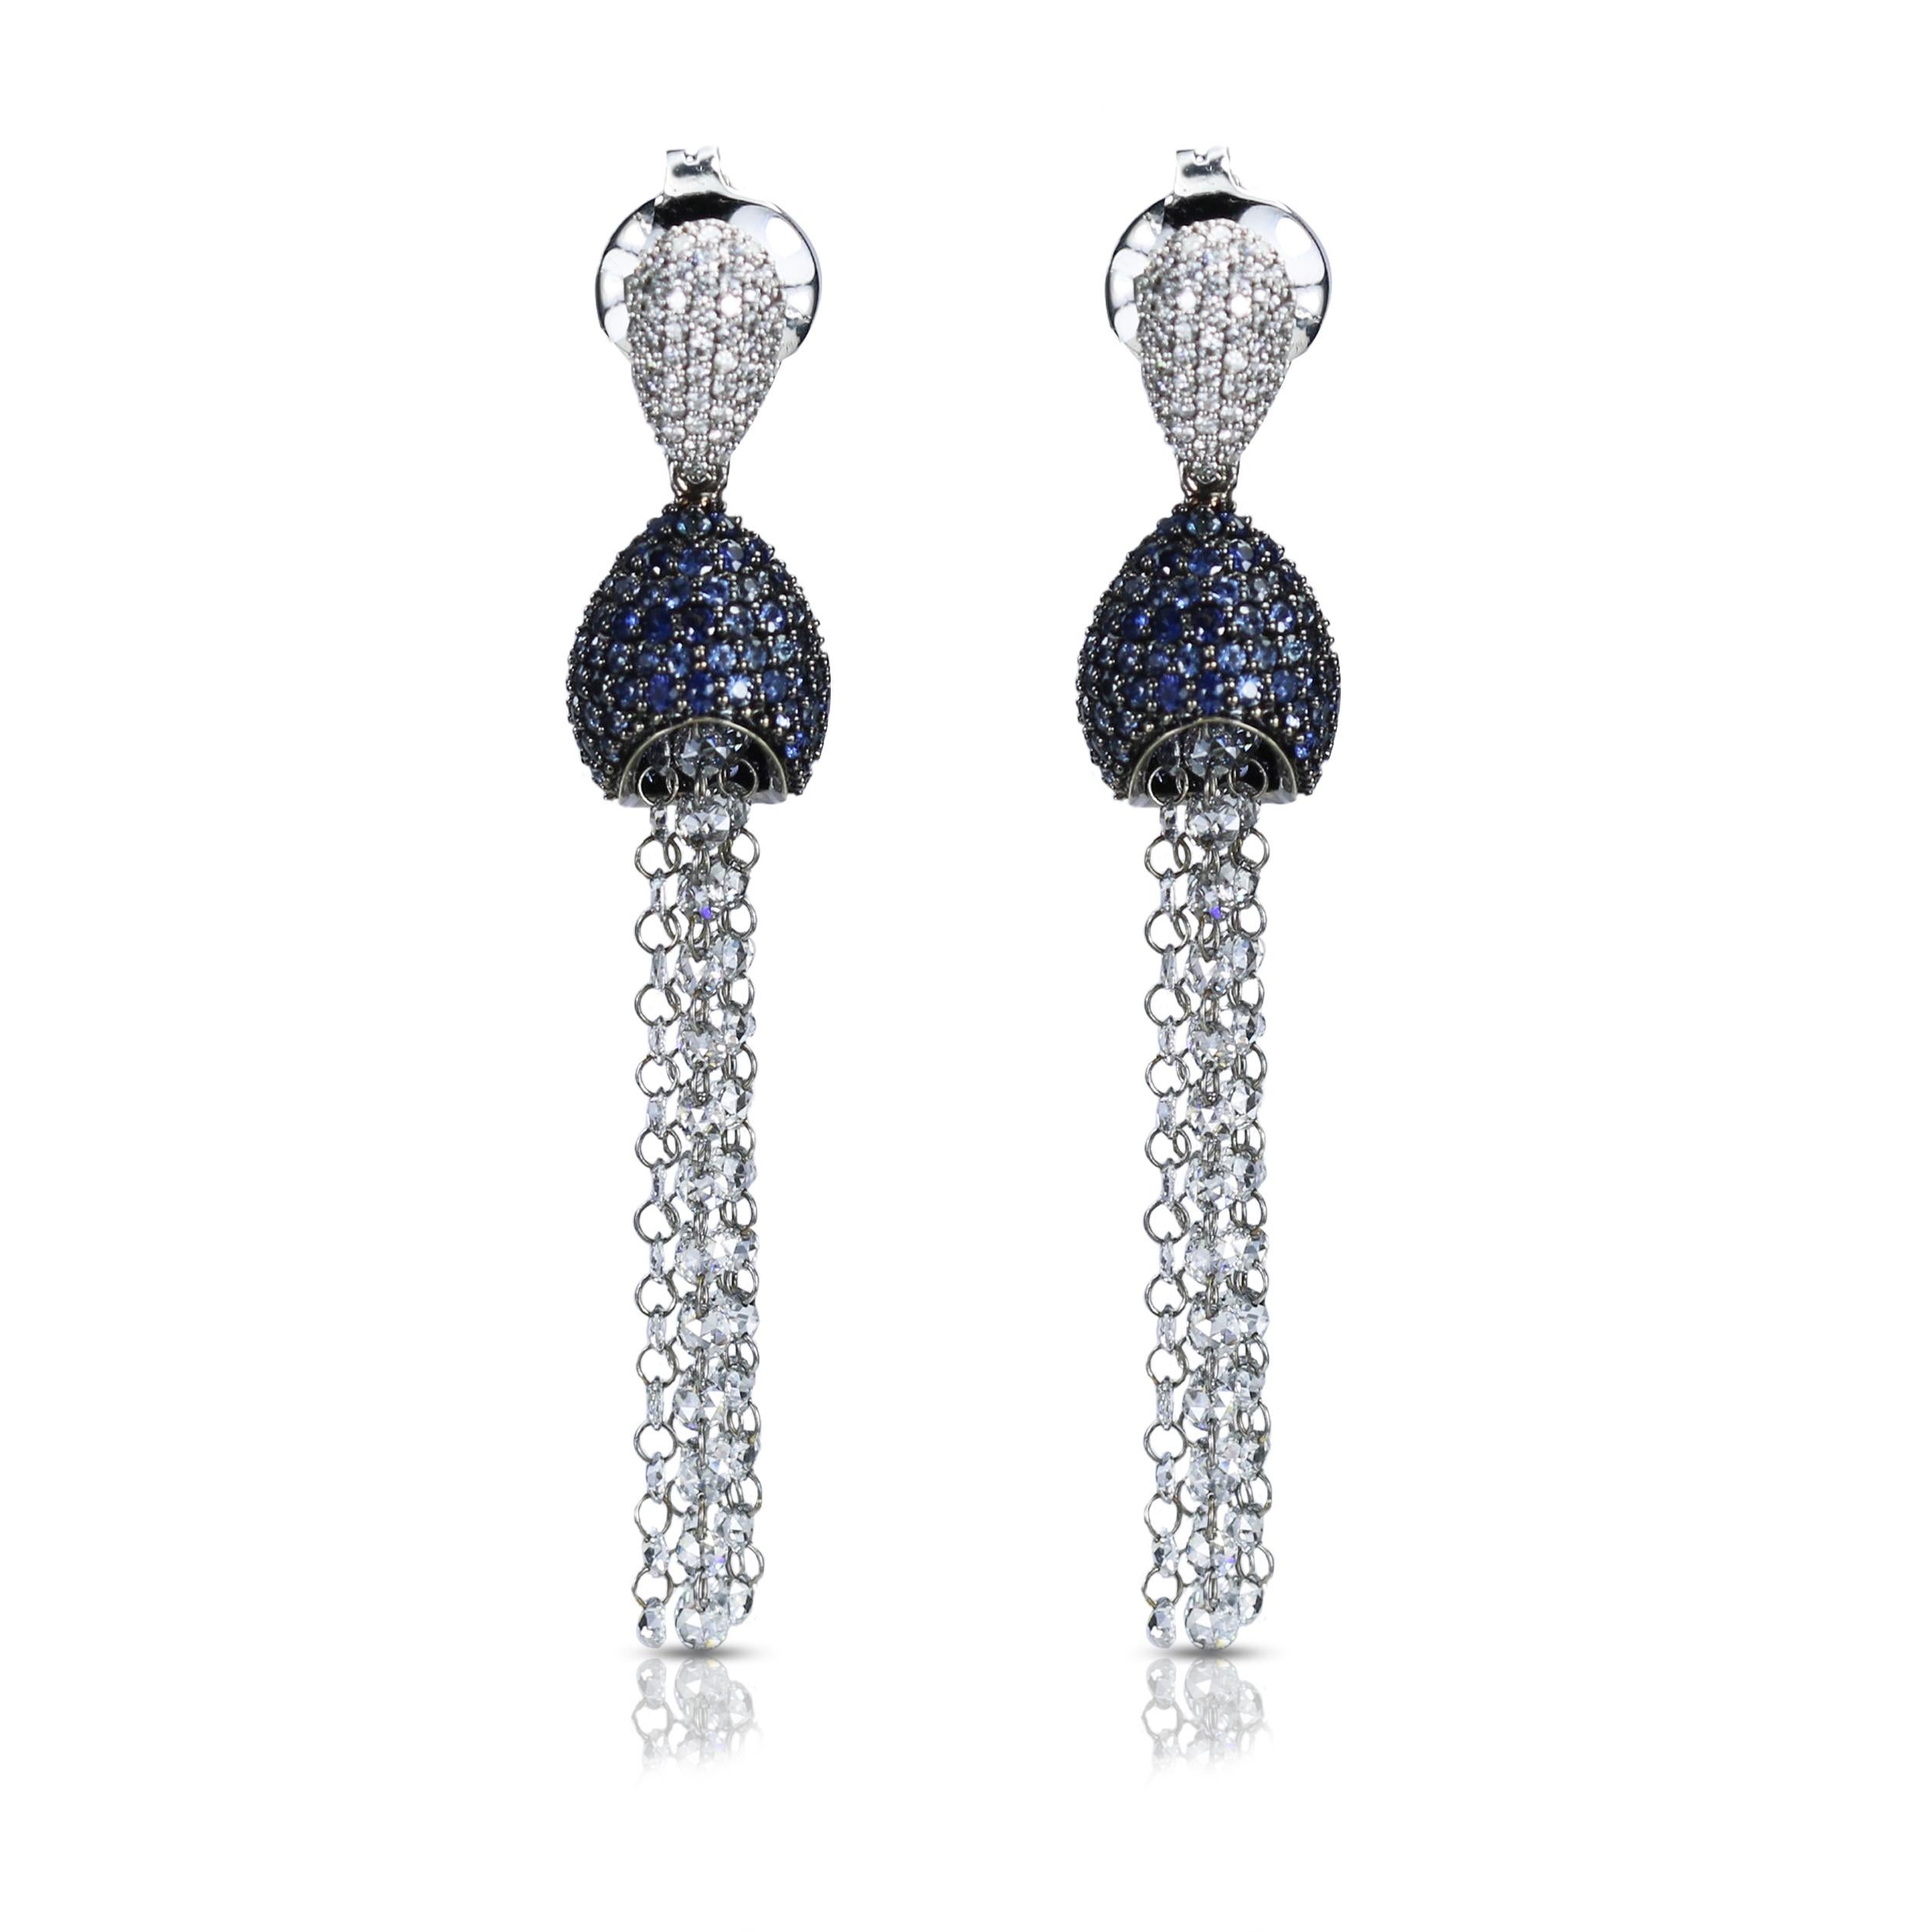 F-G/ VVS-VS-SI brilliant cut and rosecut diamond and blue sapphire danglers

Investing in this heirloom-worthy 18K white gold pair of earrings with F-G/ VVS-VS-SI brilliant cut and rosecut diamonds accentuated by regal blue sapphires will be a